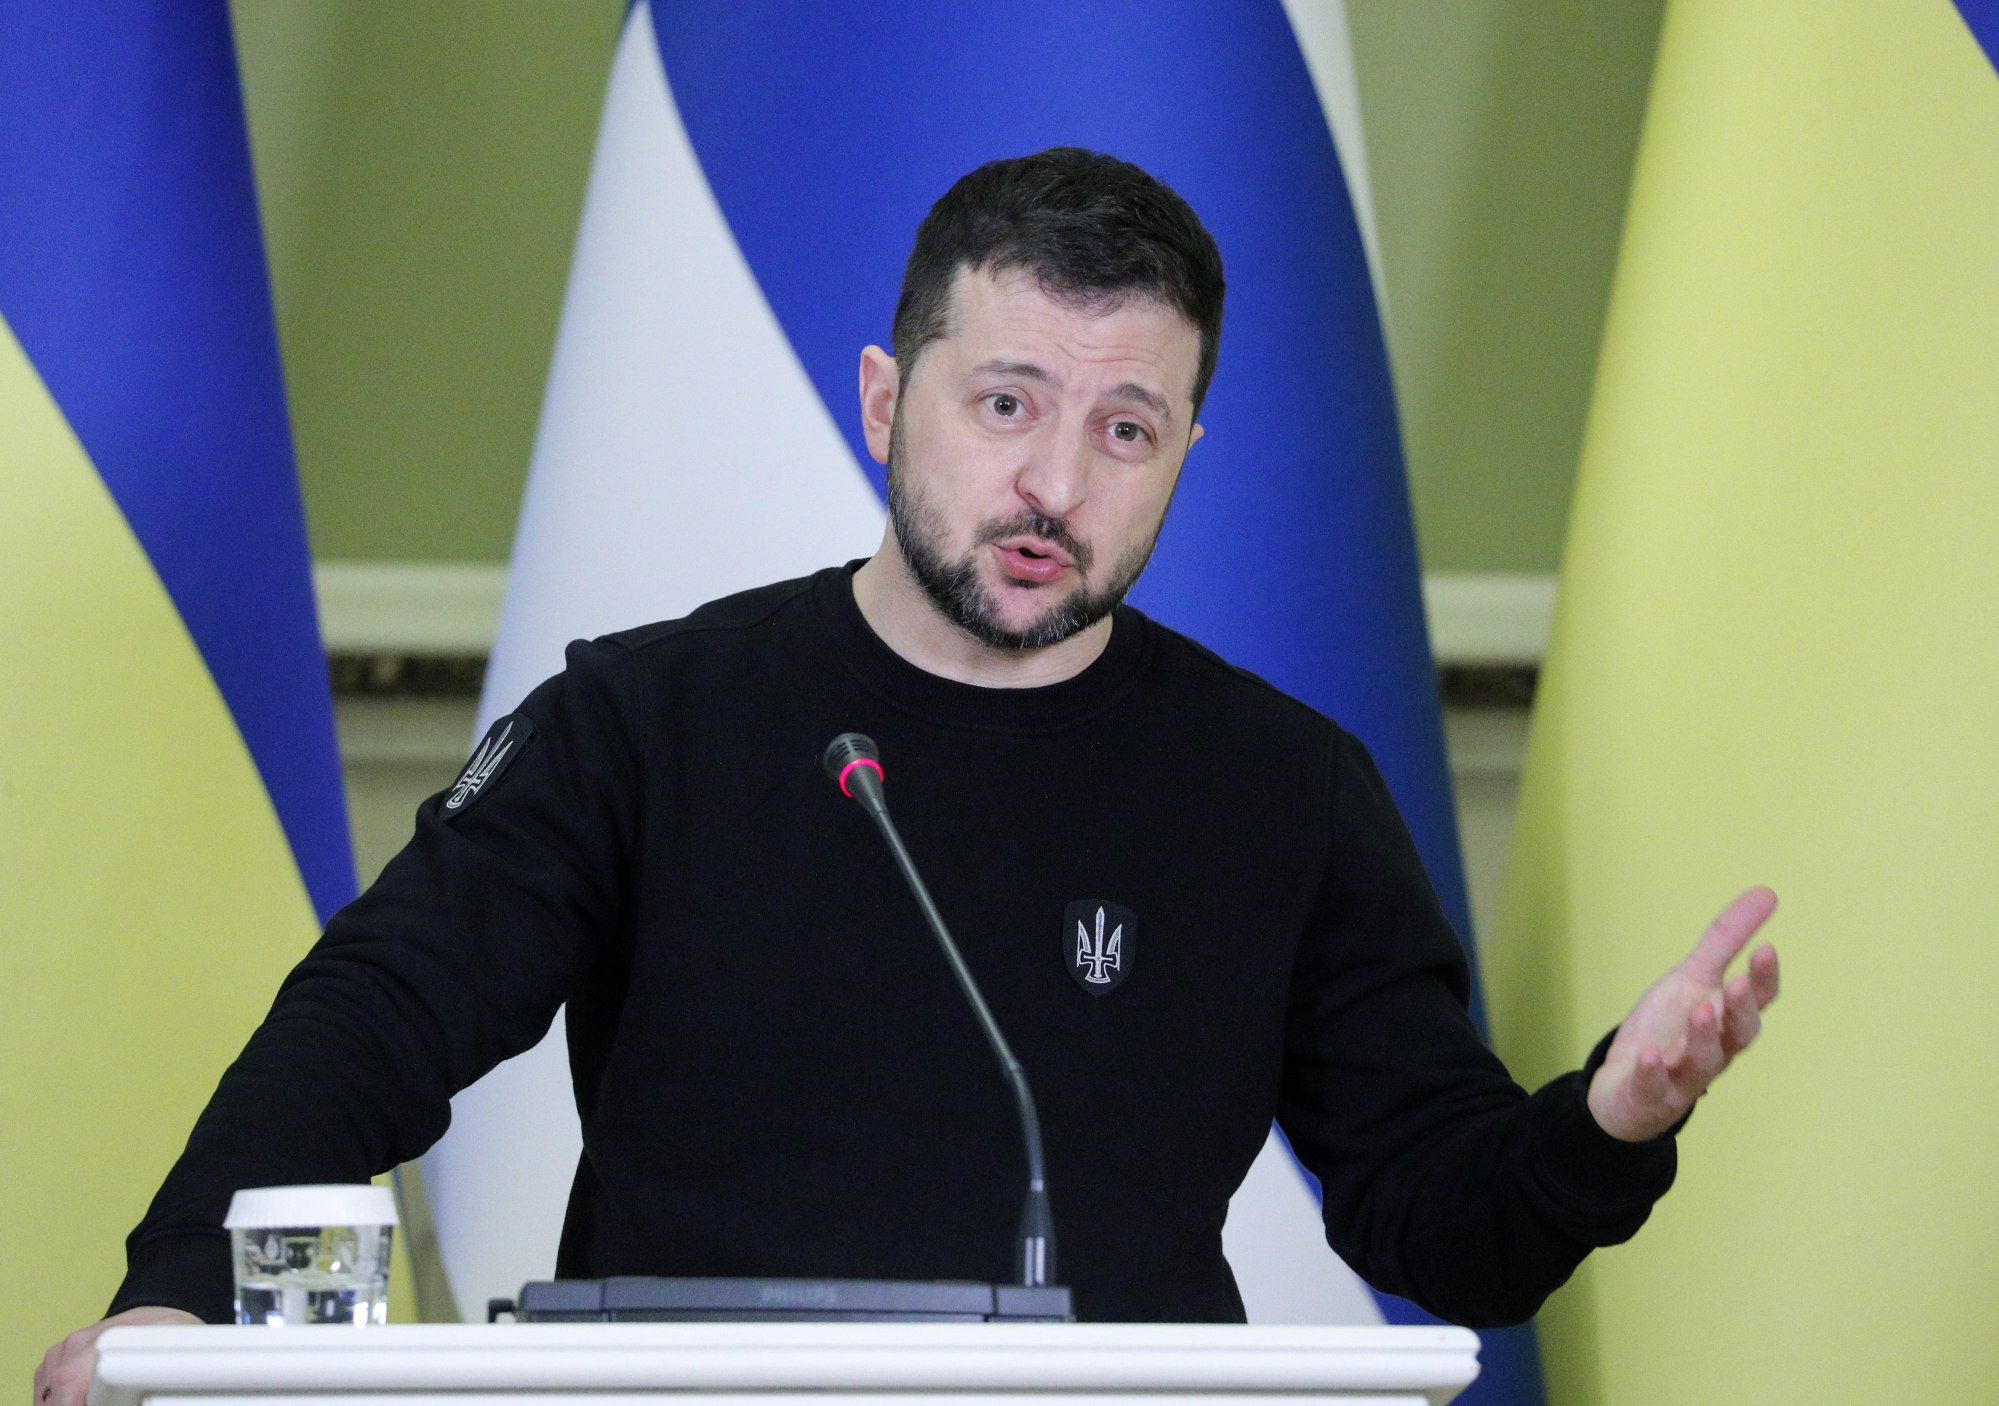 Ukrainian President Volodymyr Zelensky has yet to speak directly with Xi since the start of the Russian invasion. Photo: EPA-EFE